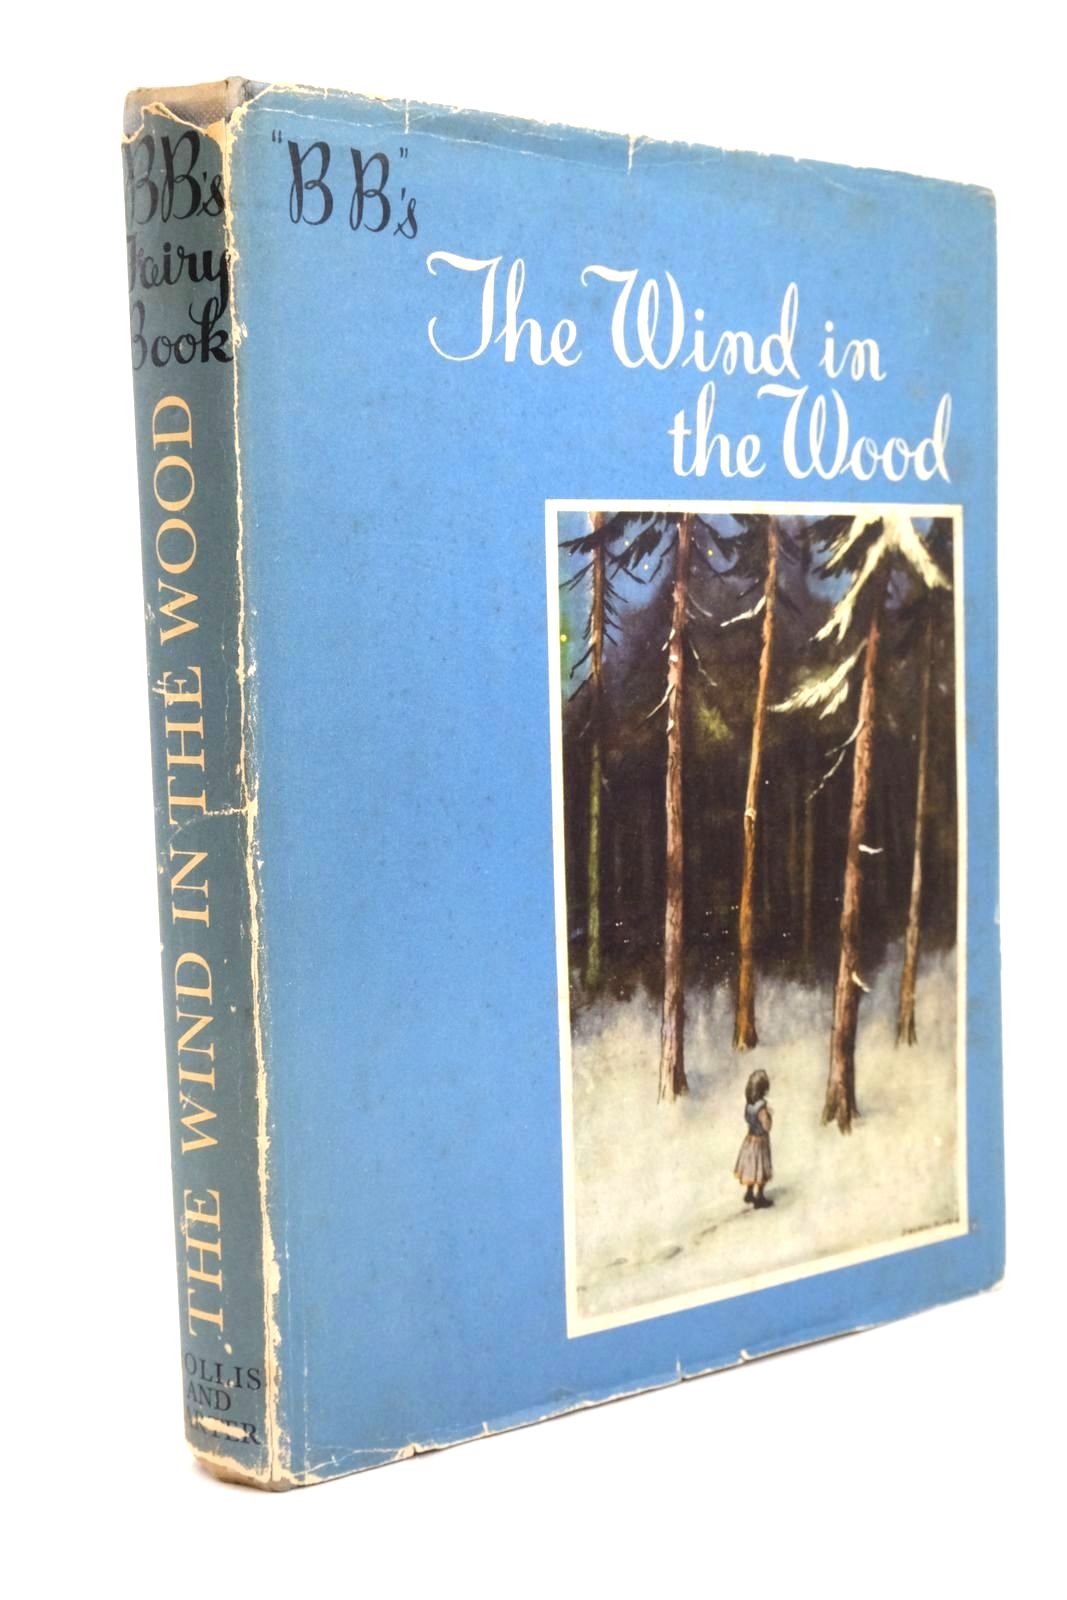 Photo of THE WIND IN THE WOOD written by BB,  illustrated by BB,  published by Hollis &amp; Carter (STOCK CODE: 1322267)  for sale by Stella & Rose's Books